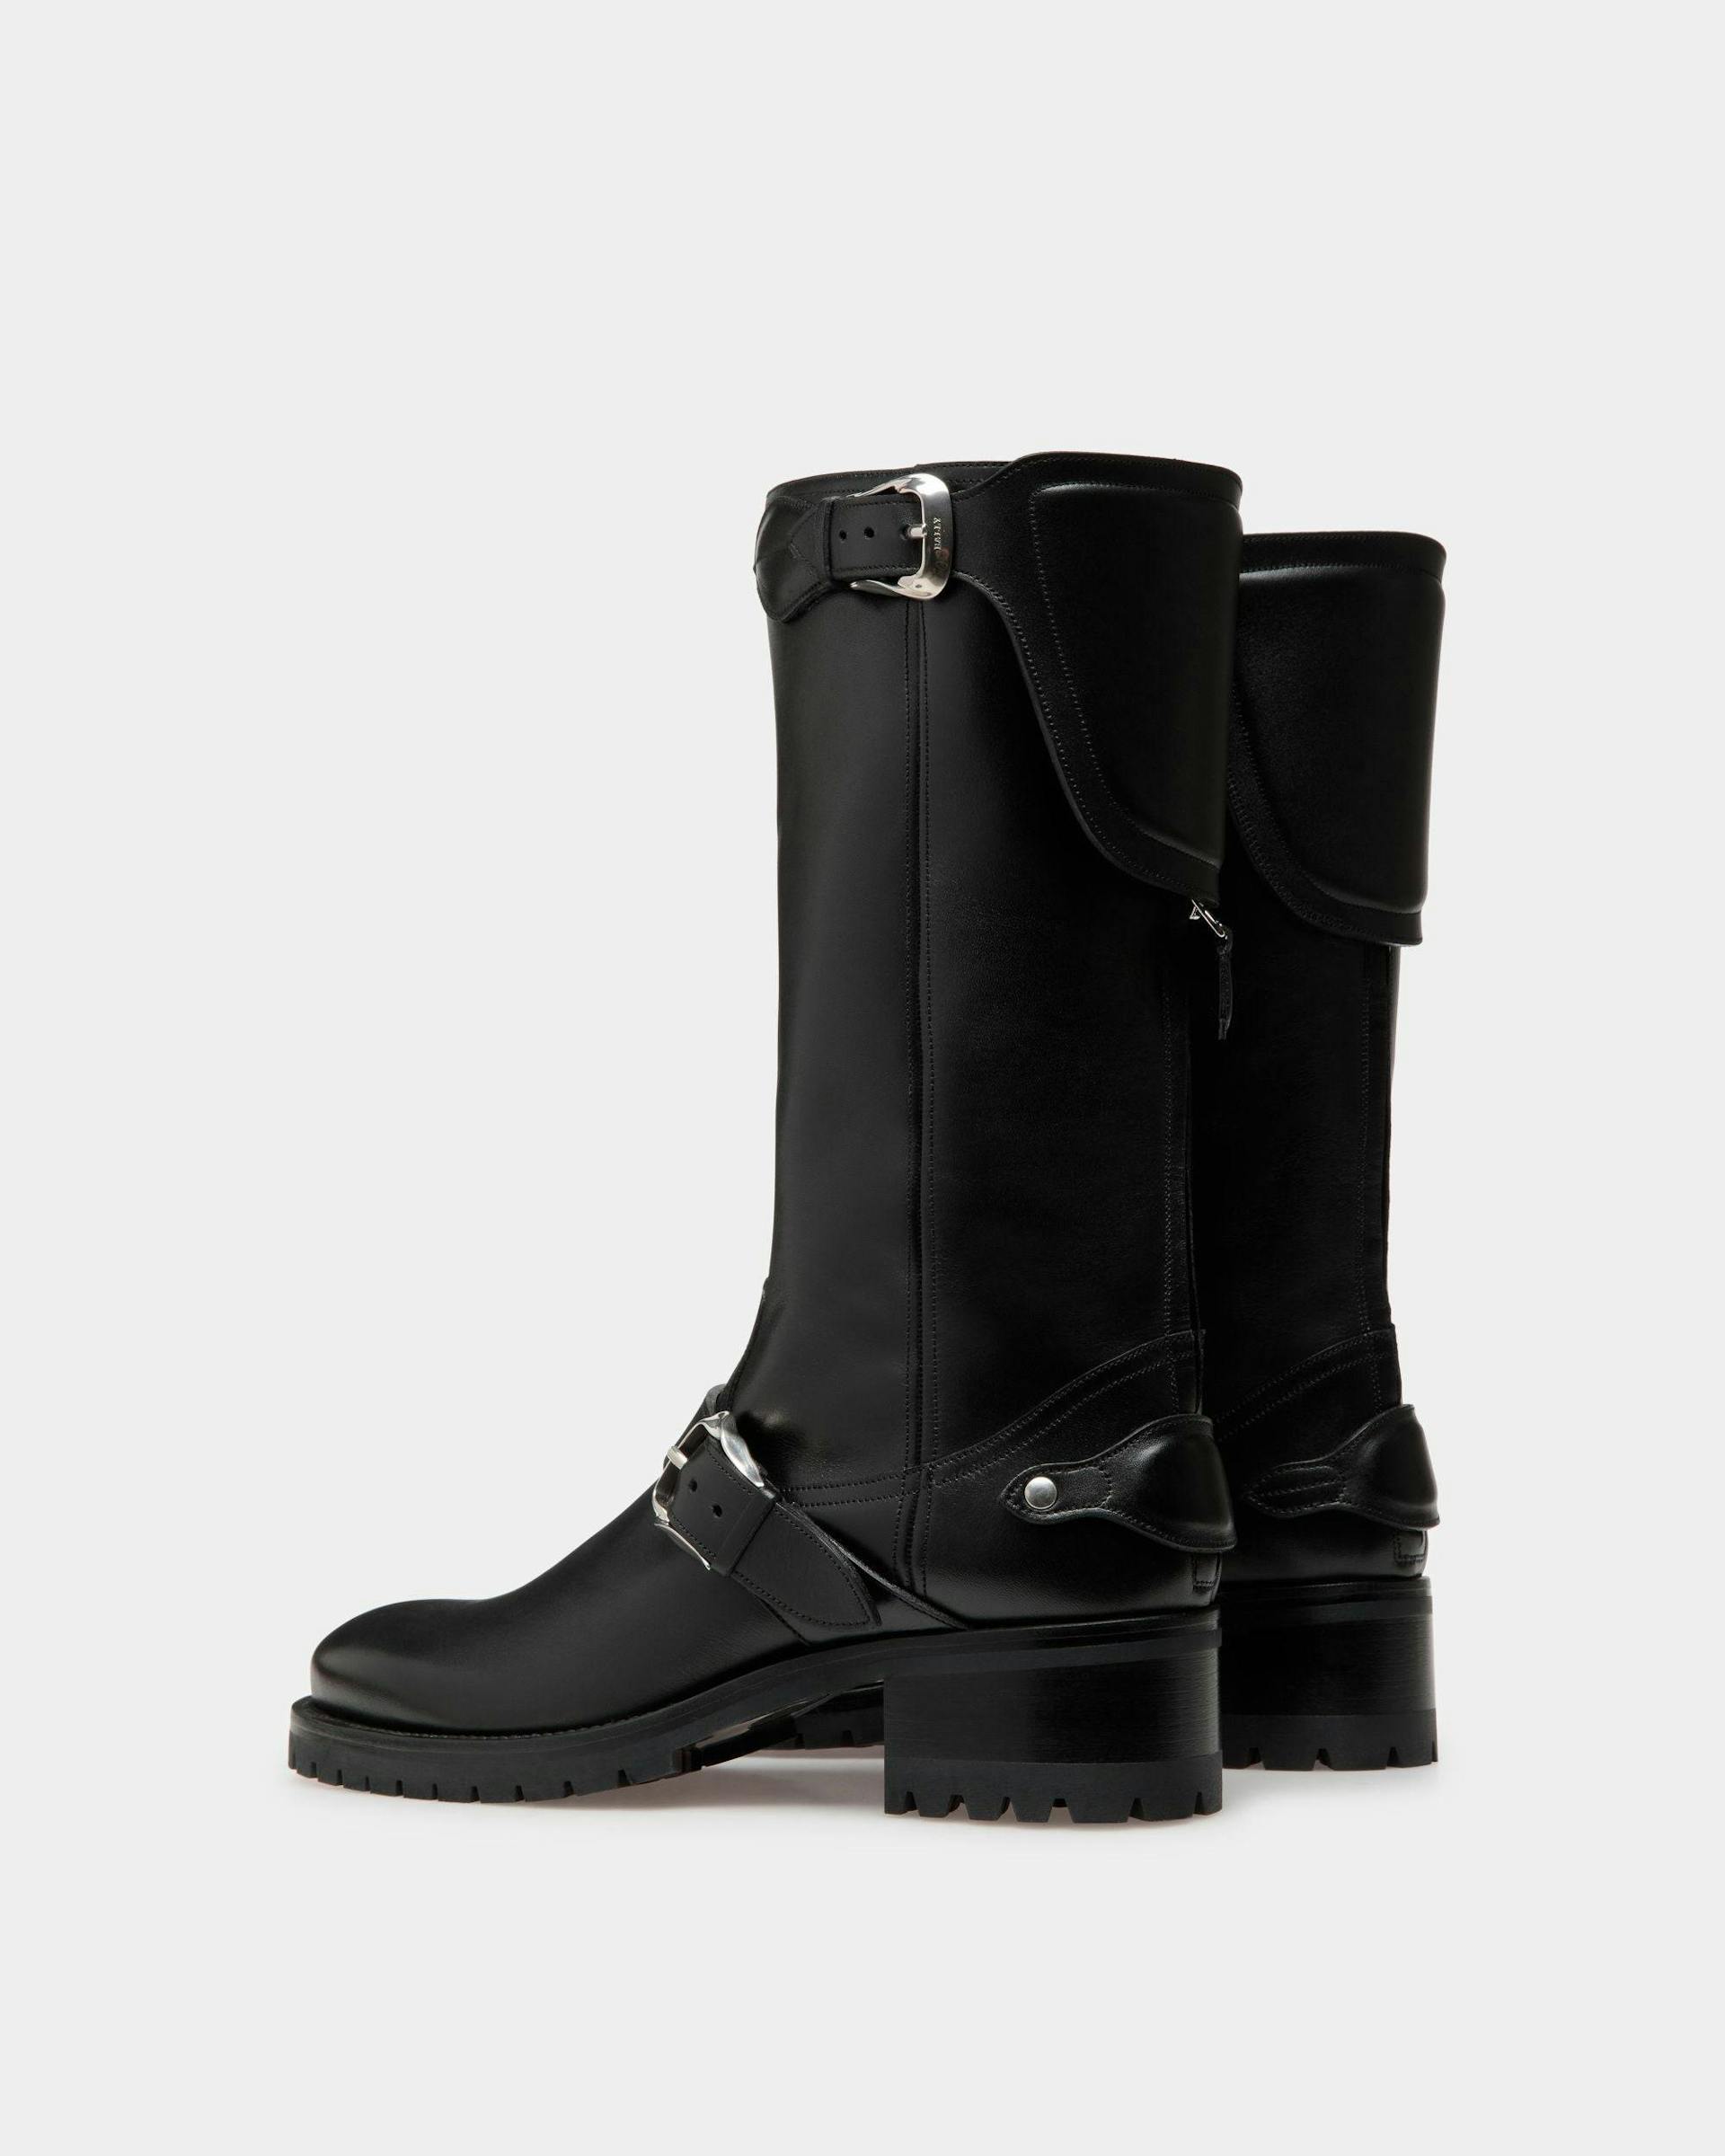 Men's Ardis Long Boots In Black Leather | Bally | Still Life 3/4 Back